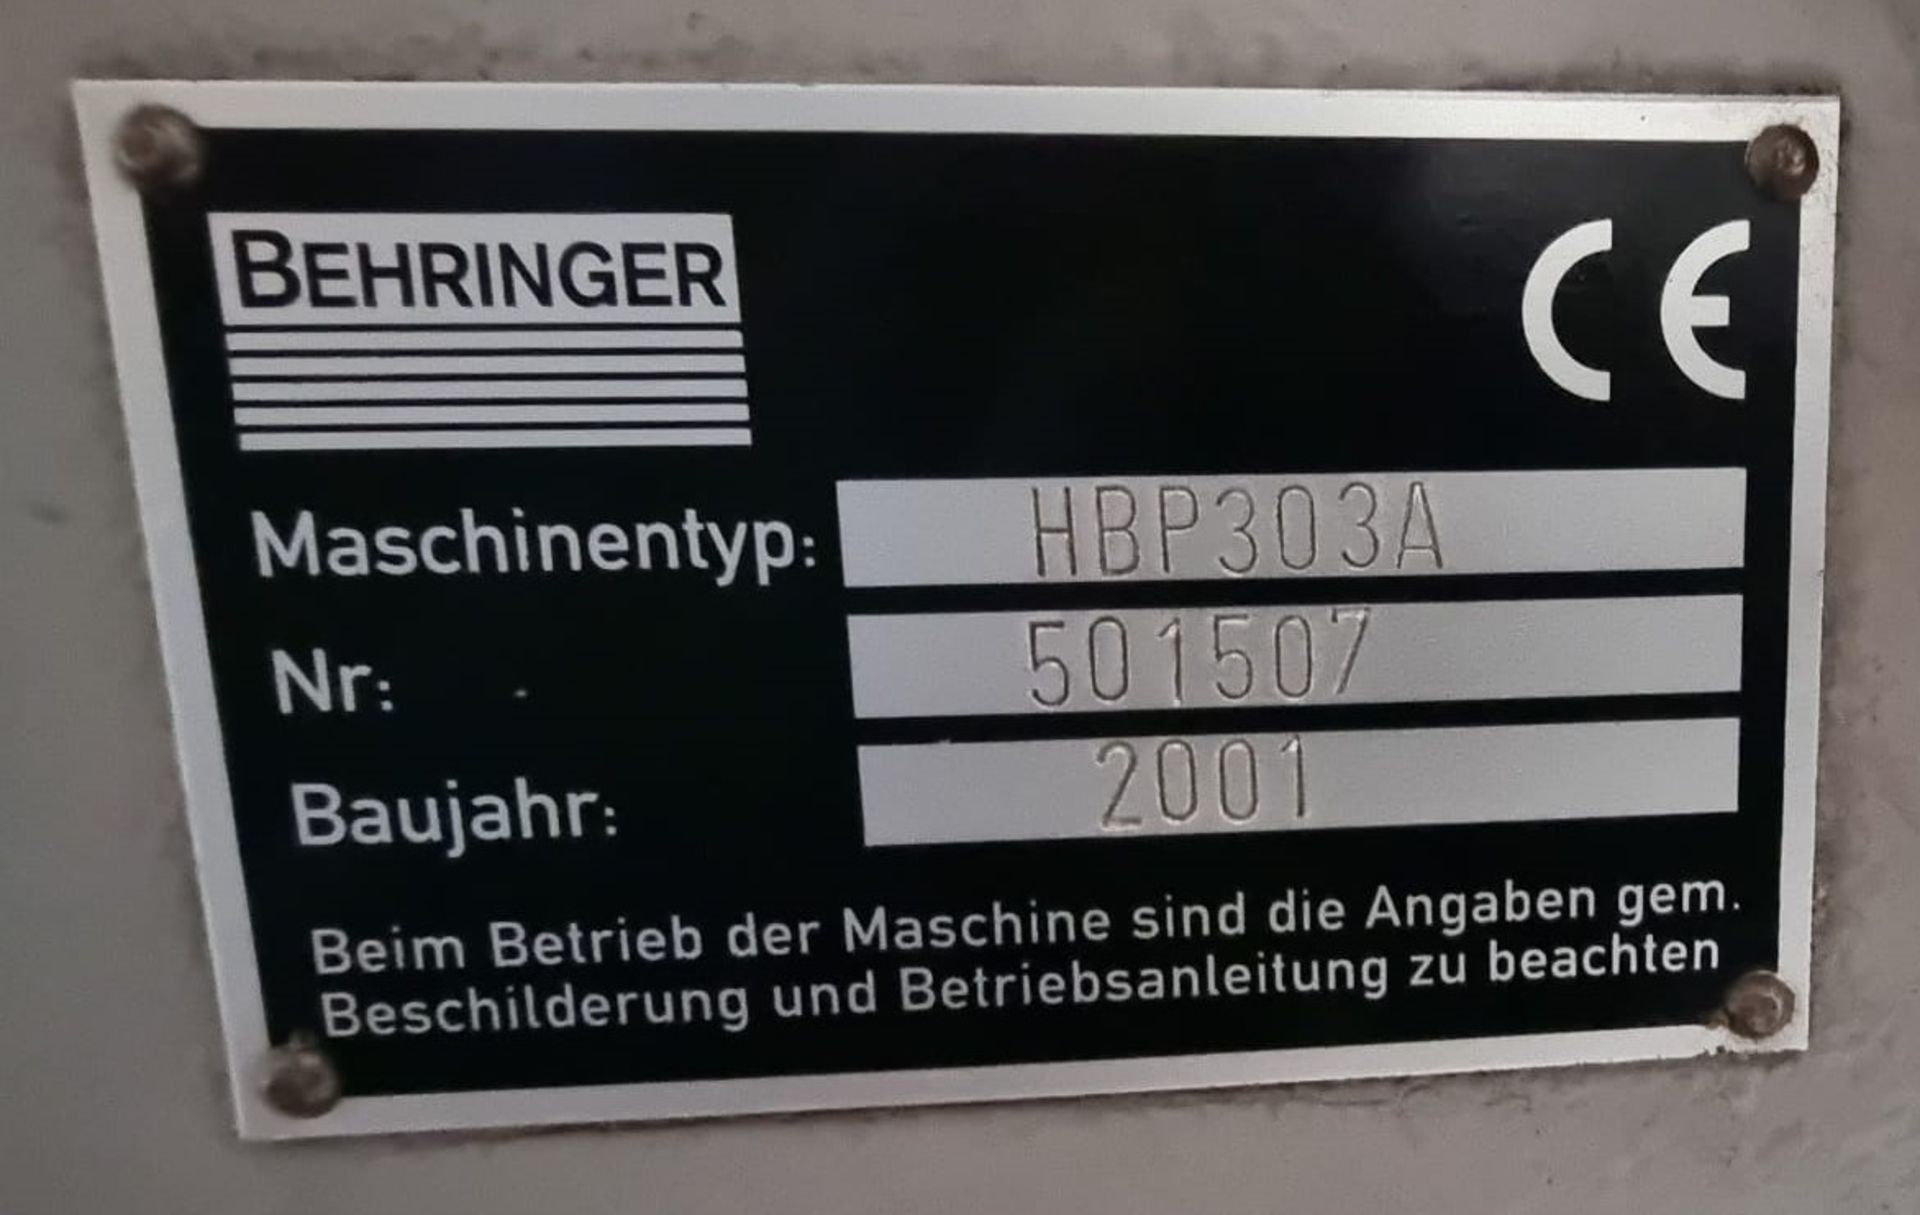 Behringer HBP 303A Twin Pillar Automatic Bandsaw - Image 10 of 10